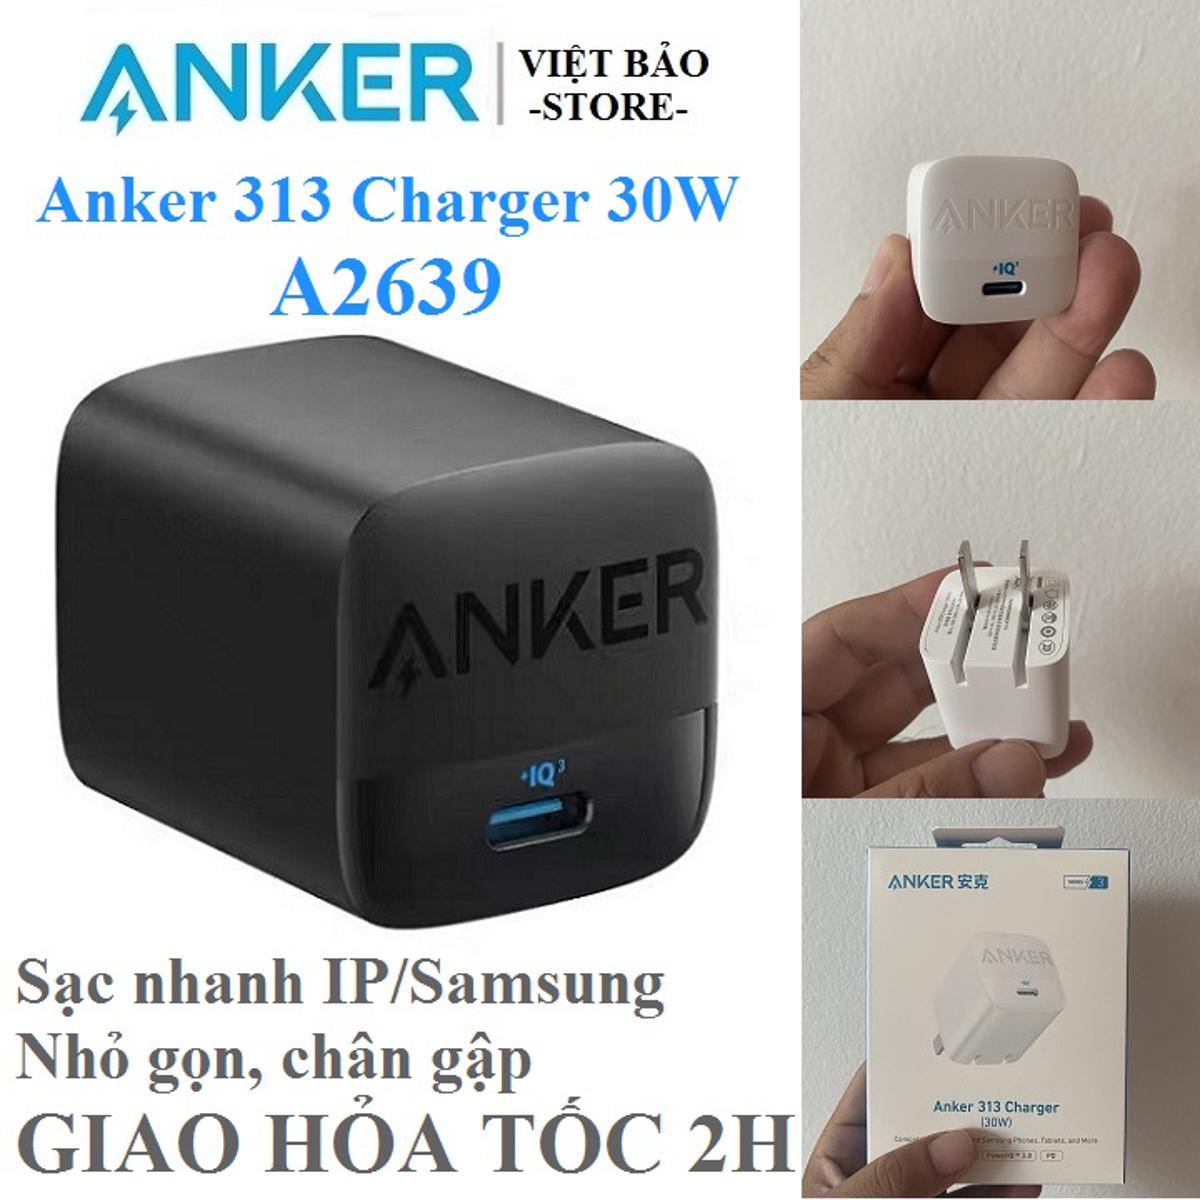 Anker 30W Charger 313 Foldable Fast Charger PIQ 3.0 - KRY